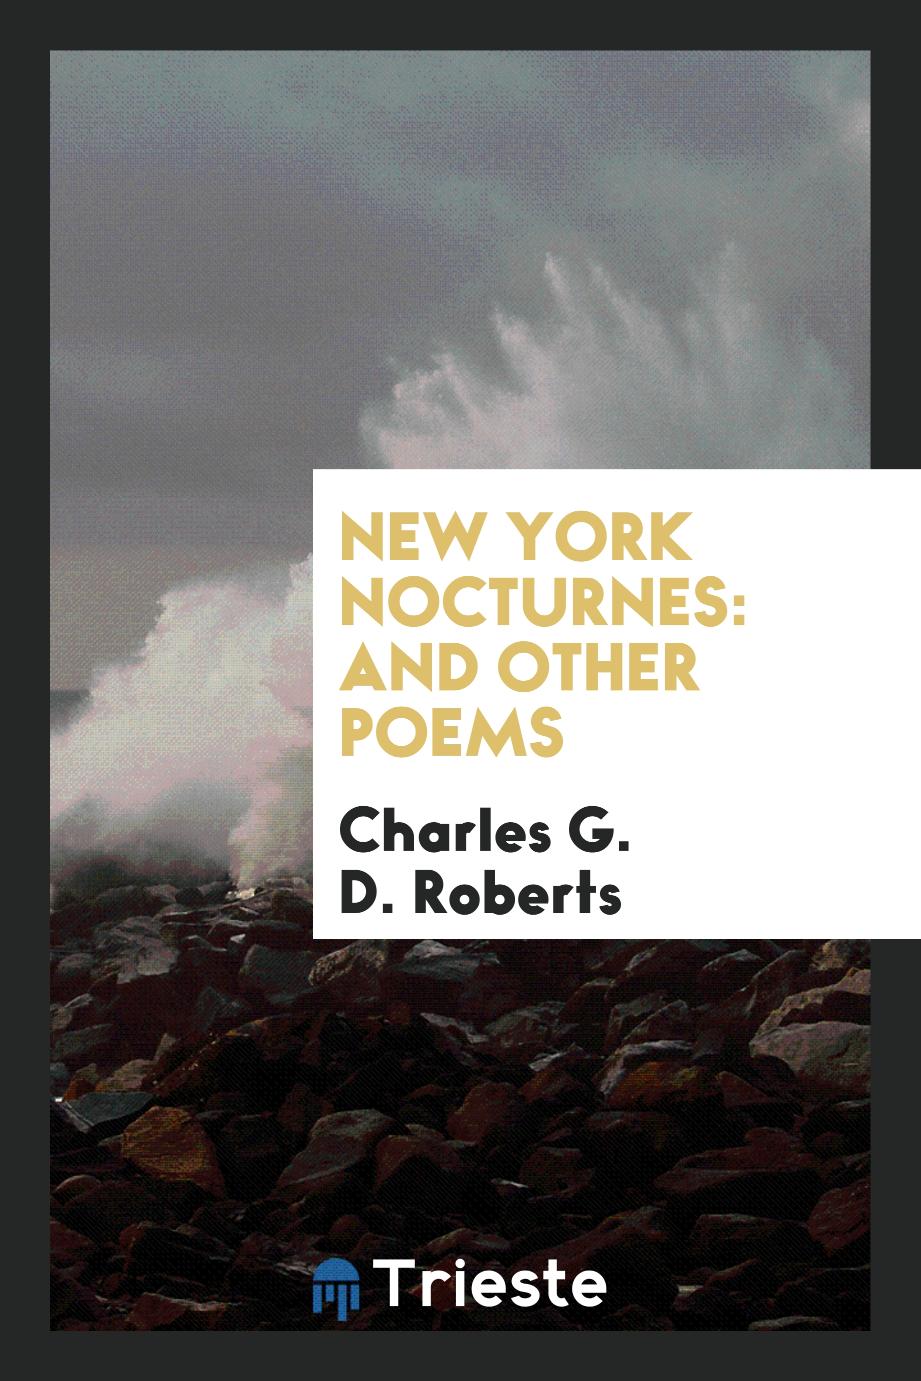 New York nocturnes: and other poems